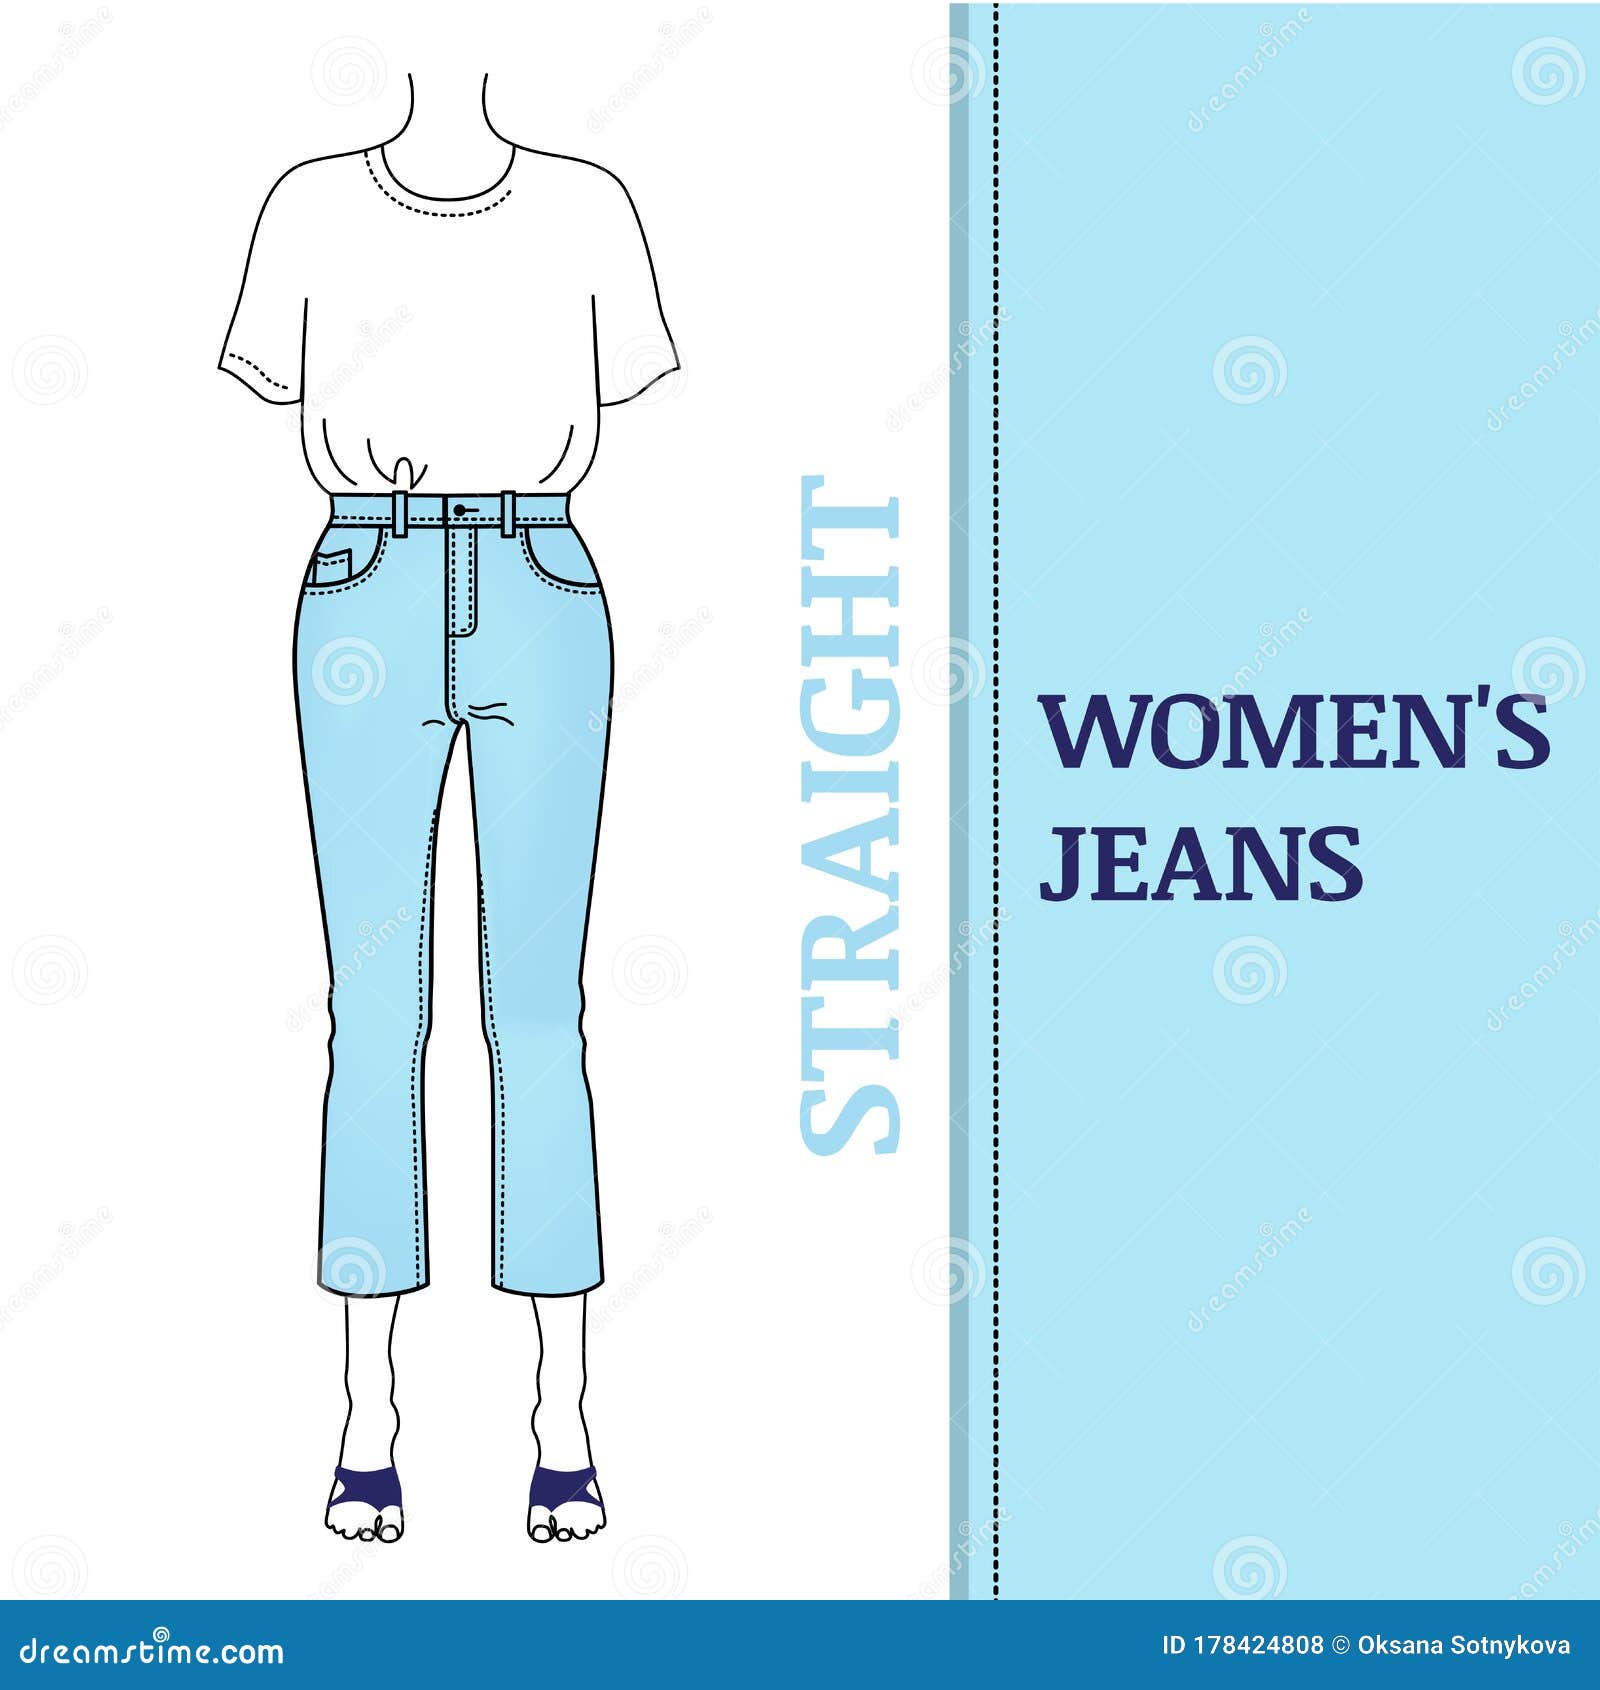 Types of Pants for Women